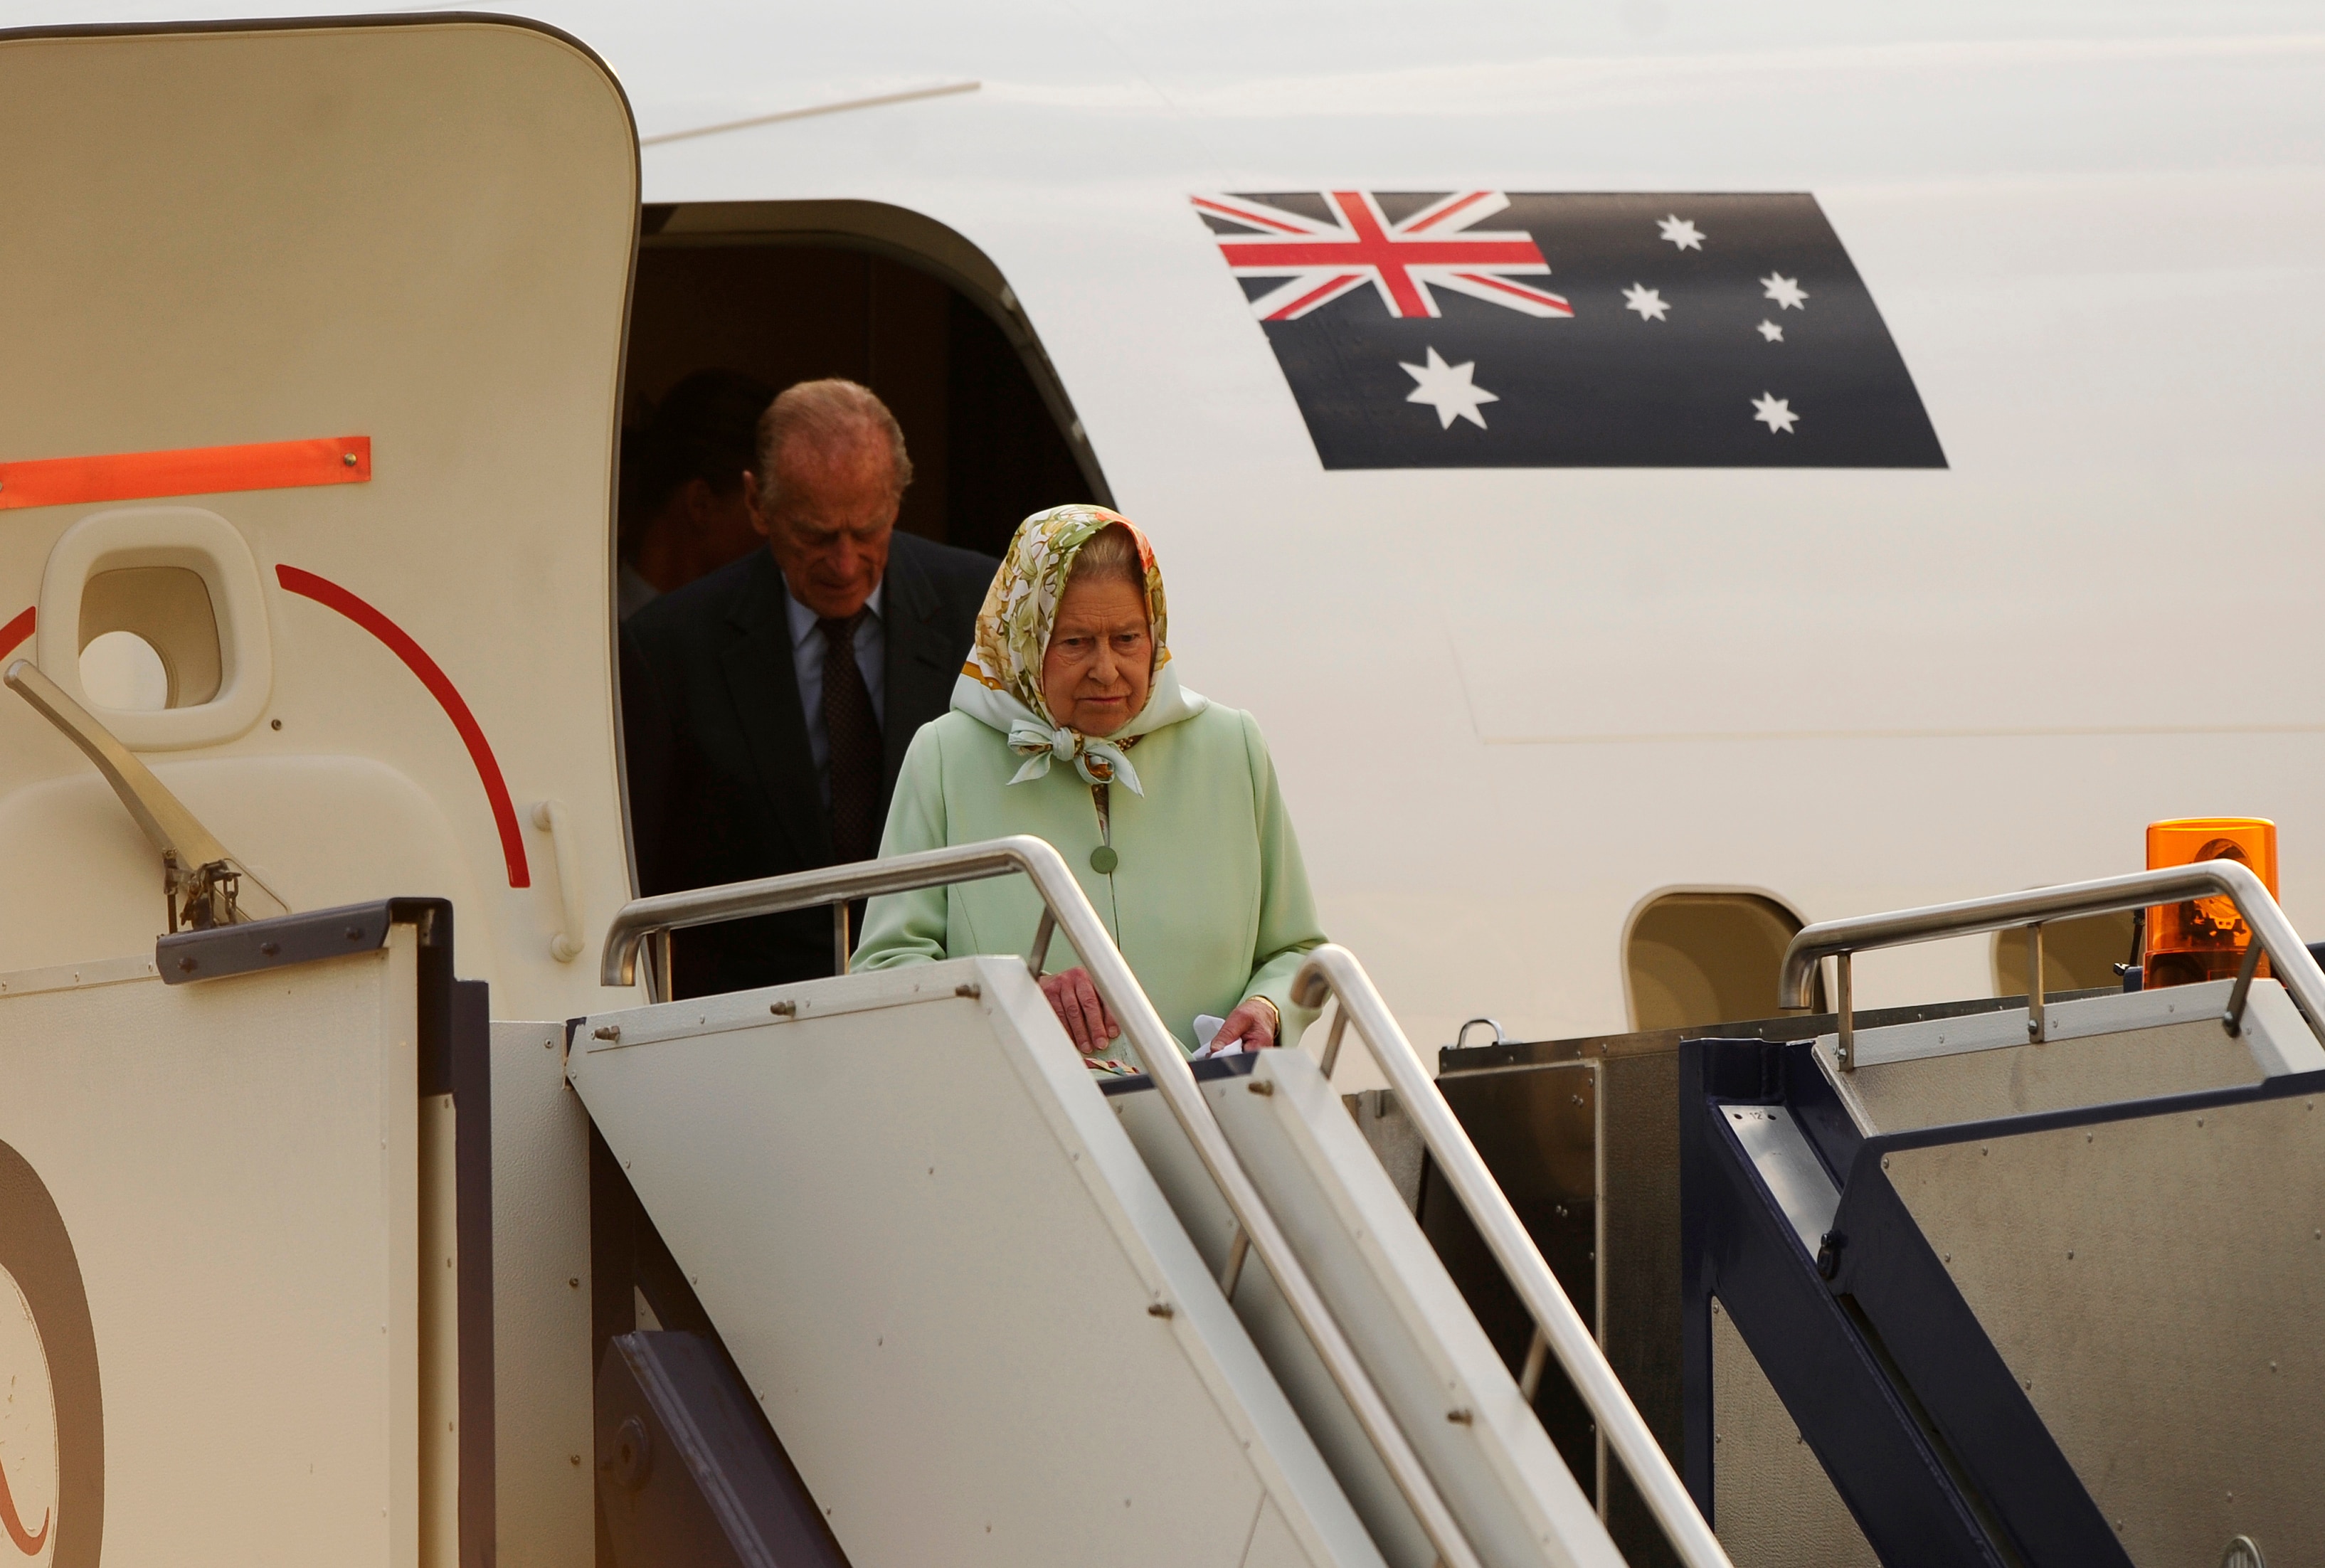 Queen Elizabeth II and The Duke of Edinburgh Prince Philip arrive at Defence Establishment Fairbairn in Canberra after their visit to Brisbane on Monday, Oct. 24, 2011. (AAP Image/Stuart Walmsley) NO ARCHIVING